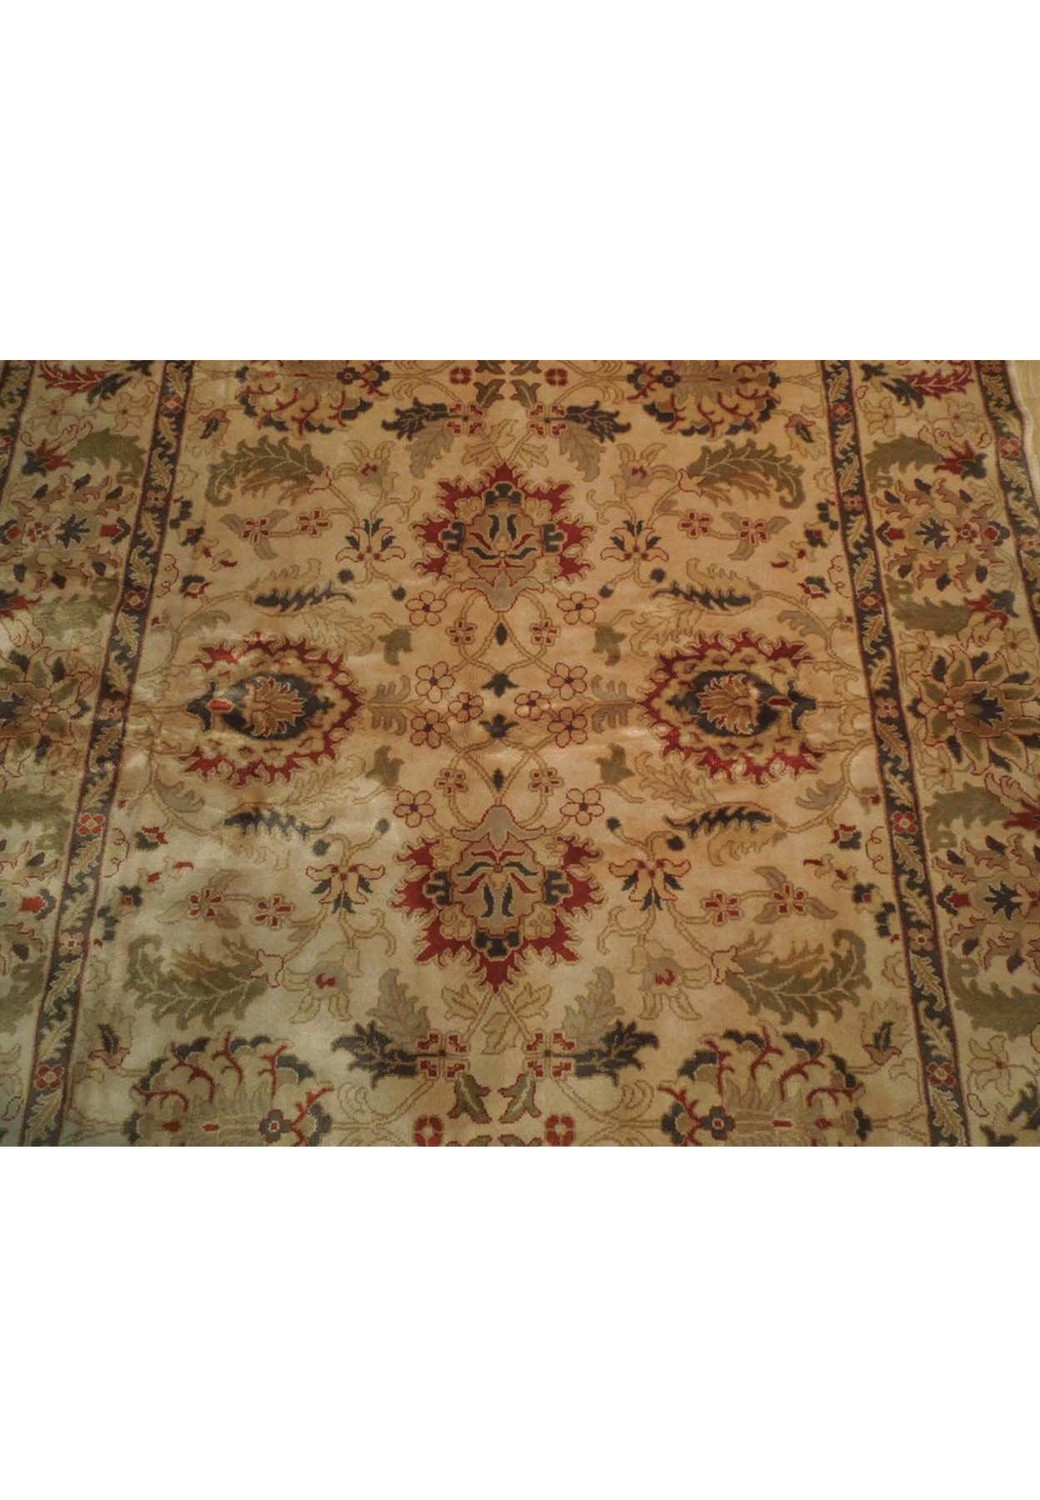 6 x 9 Size Rugs, Rugs 1.83 x 2.74 Meter Size